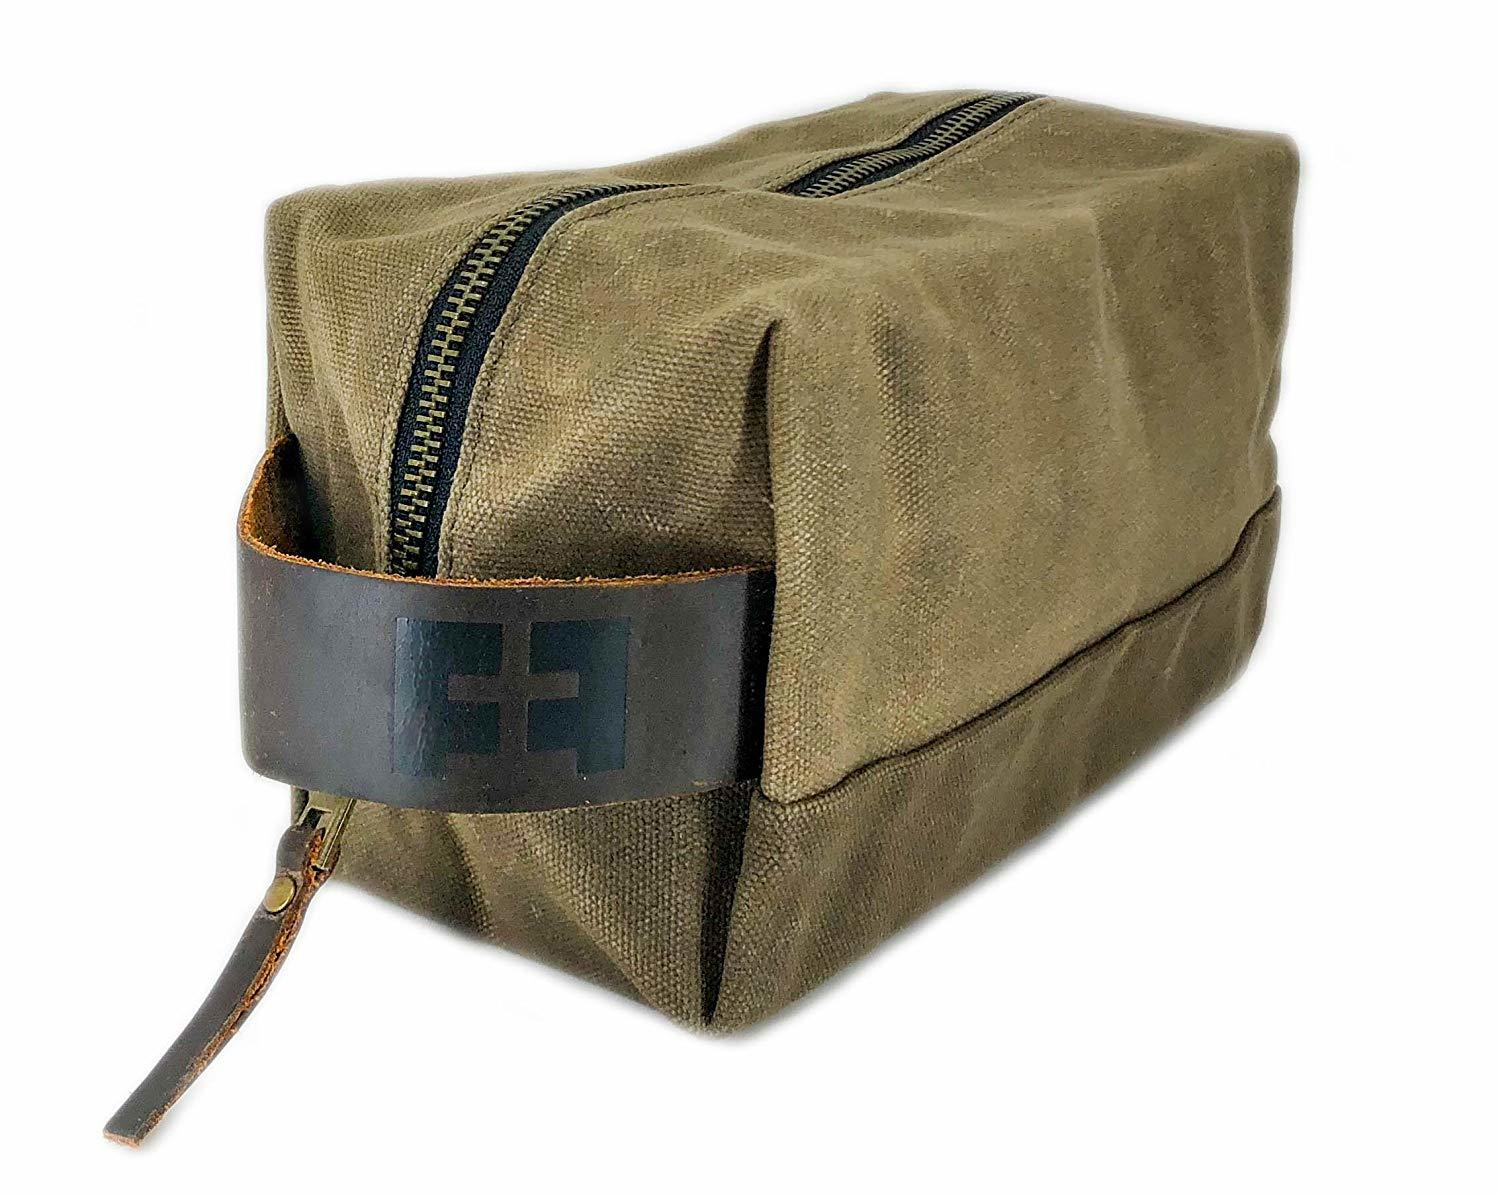 rugged toiletry bag